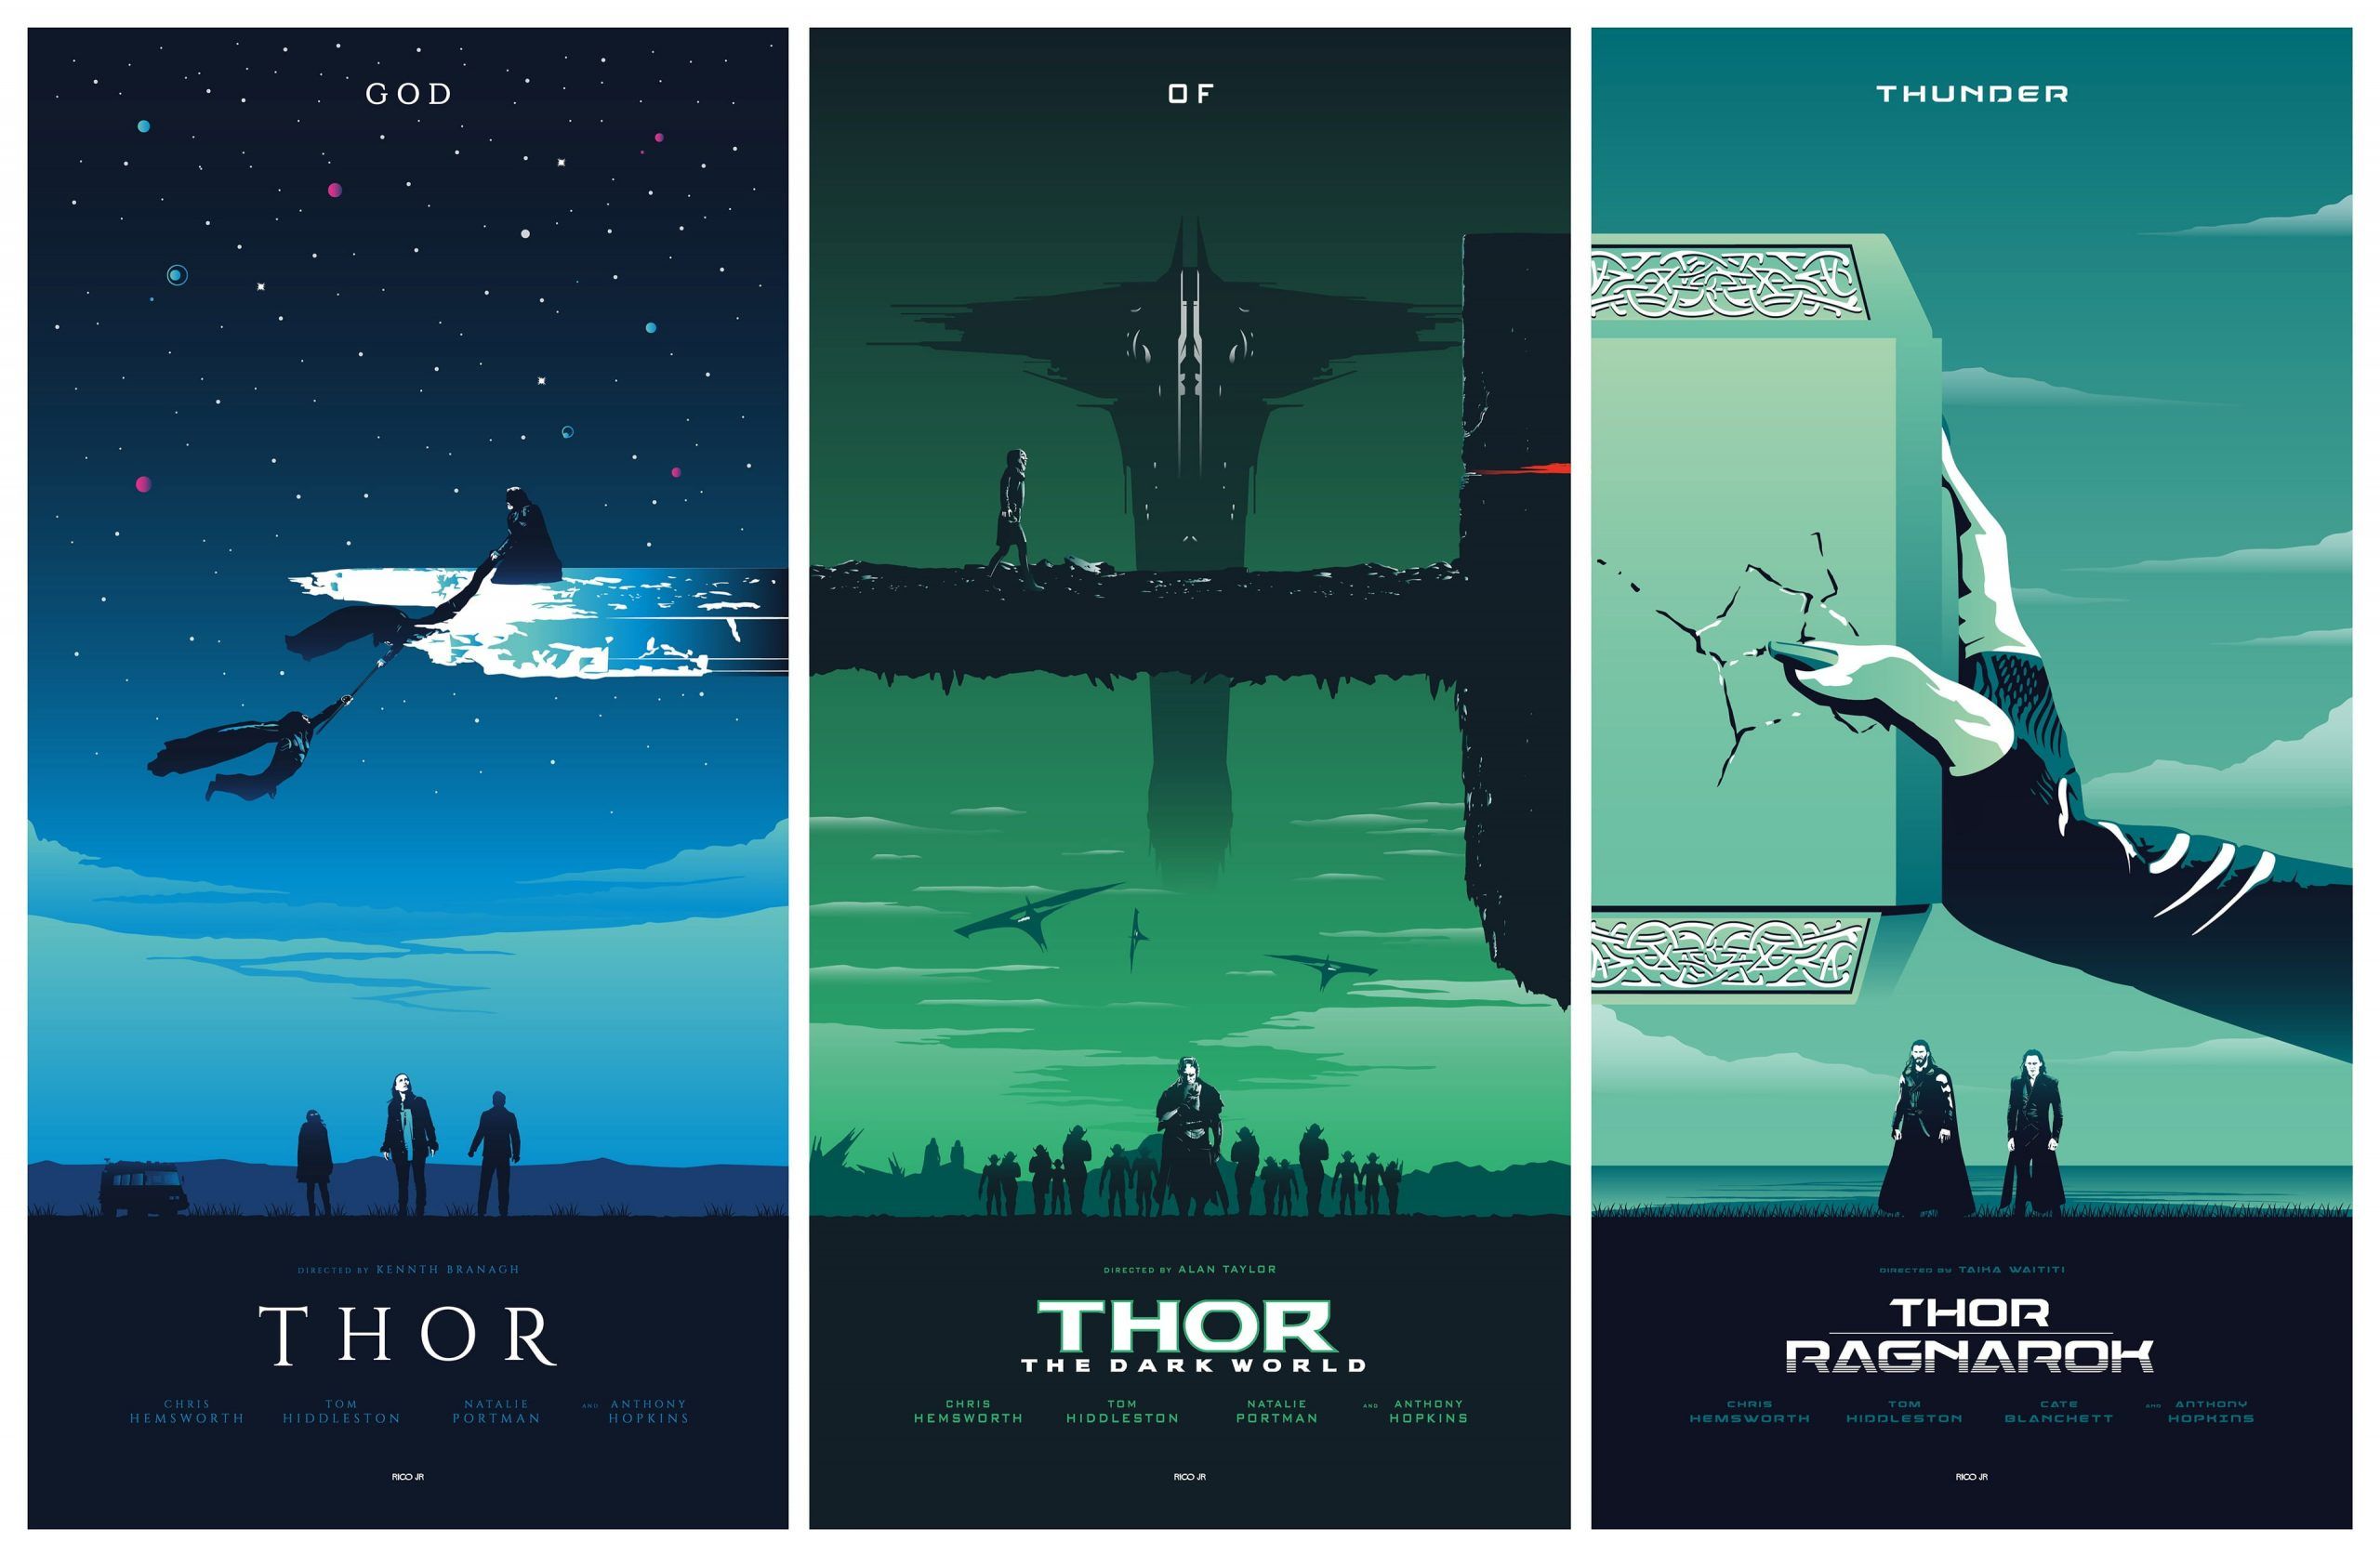 Three Thor posters, each showing a different scene from the movie. The first one has Thor riding a giant bird, the second one has Thor holding a hammer in front of a bridge, and the third one has a hand holding a knife in front of a door. - Thor